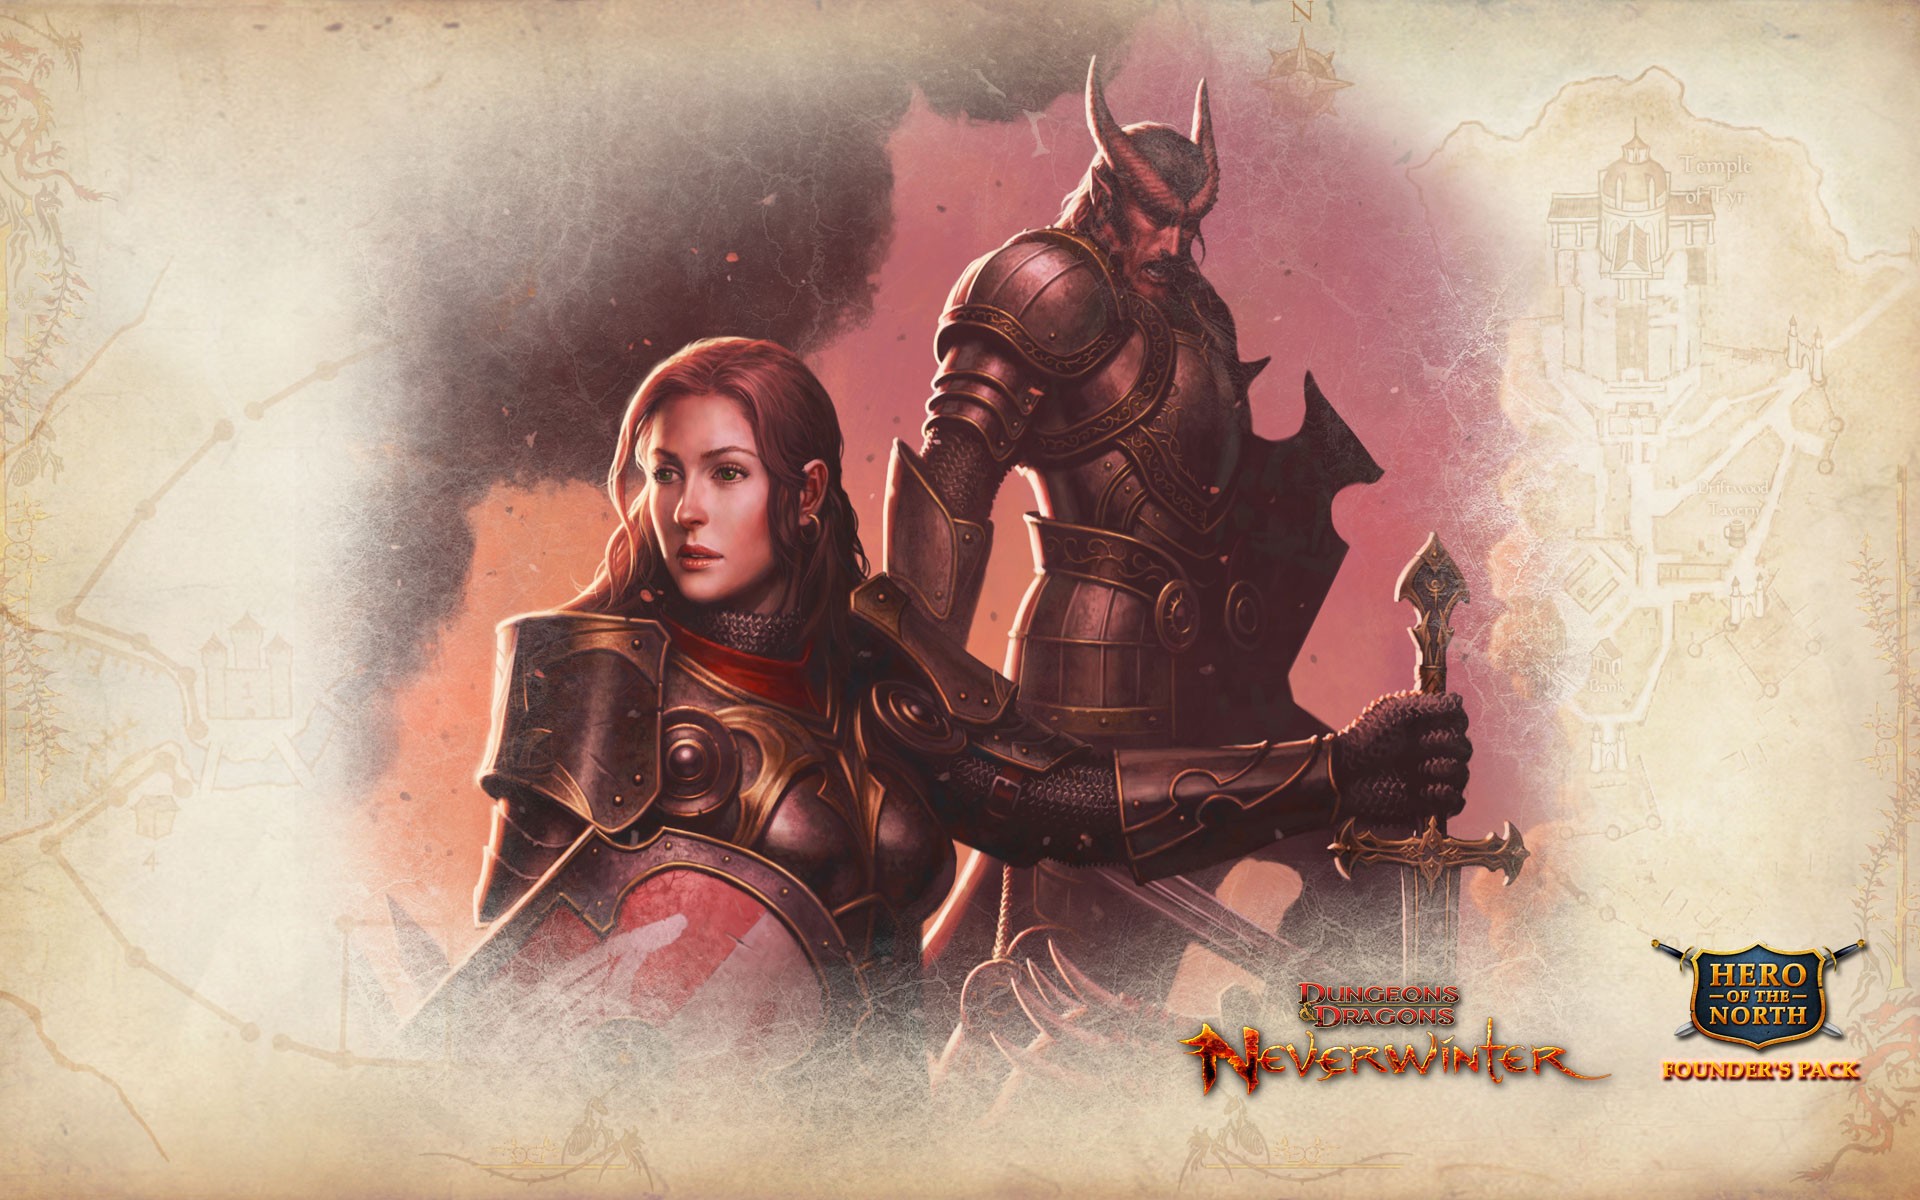 dungeons and dragons neverwinter download free